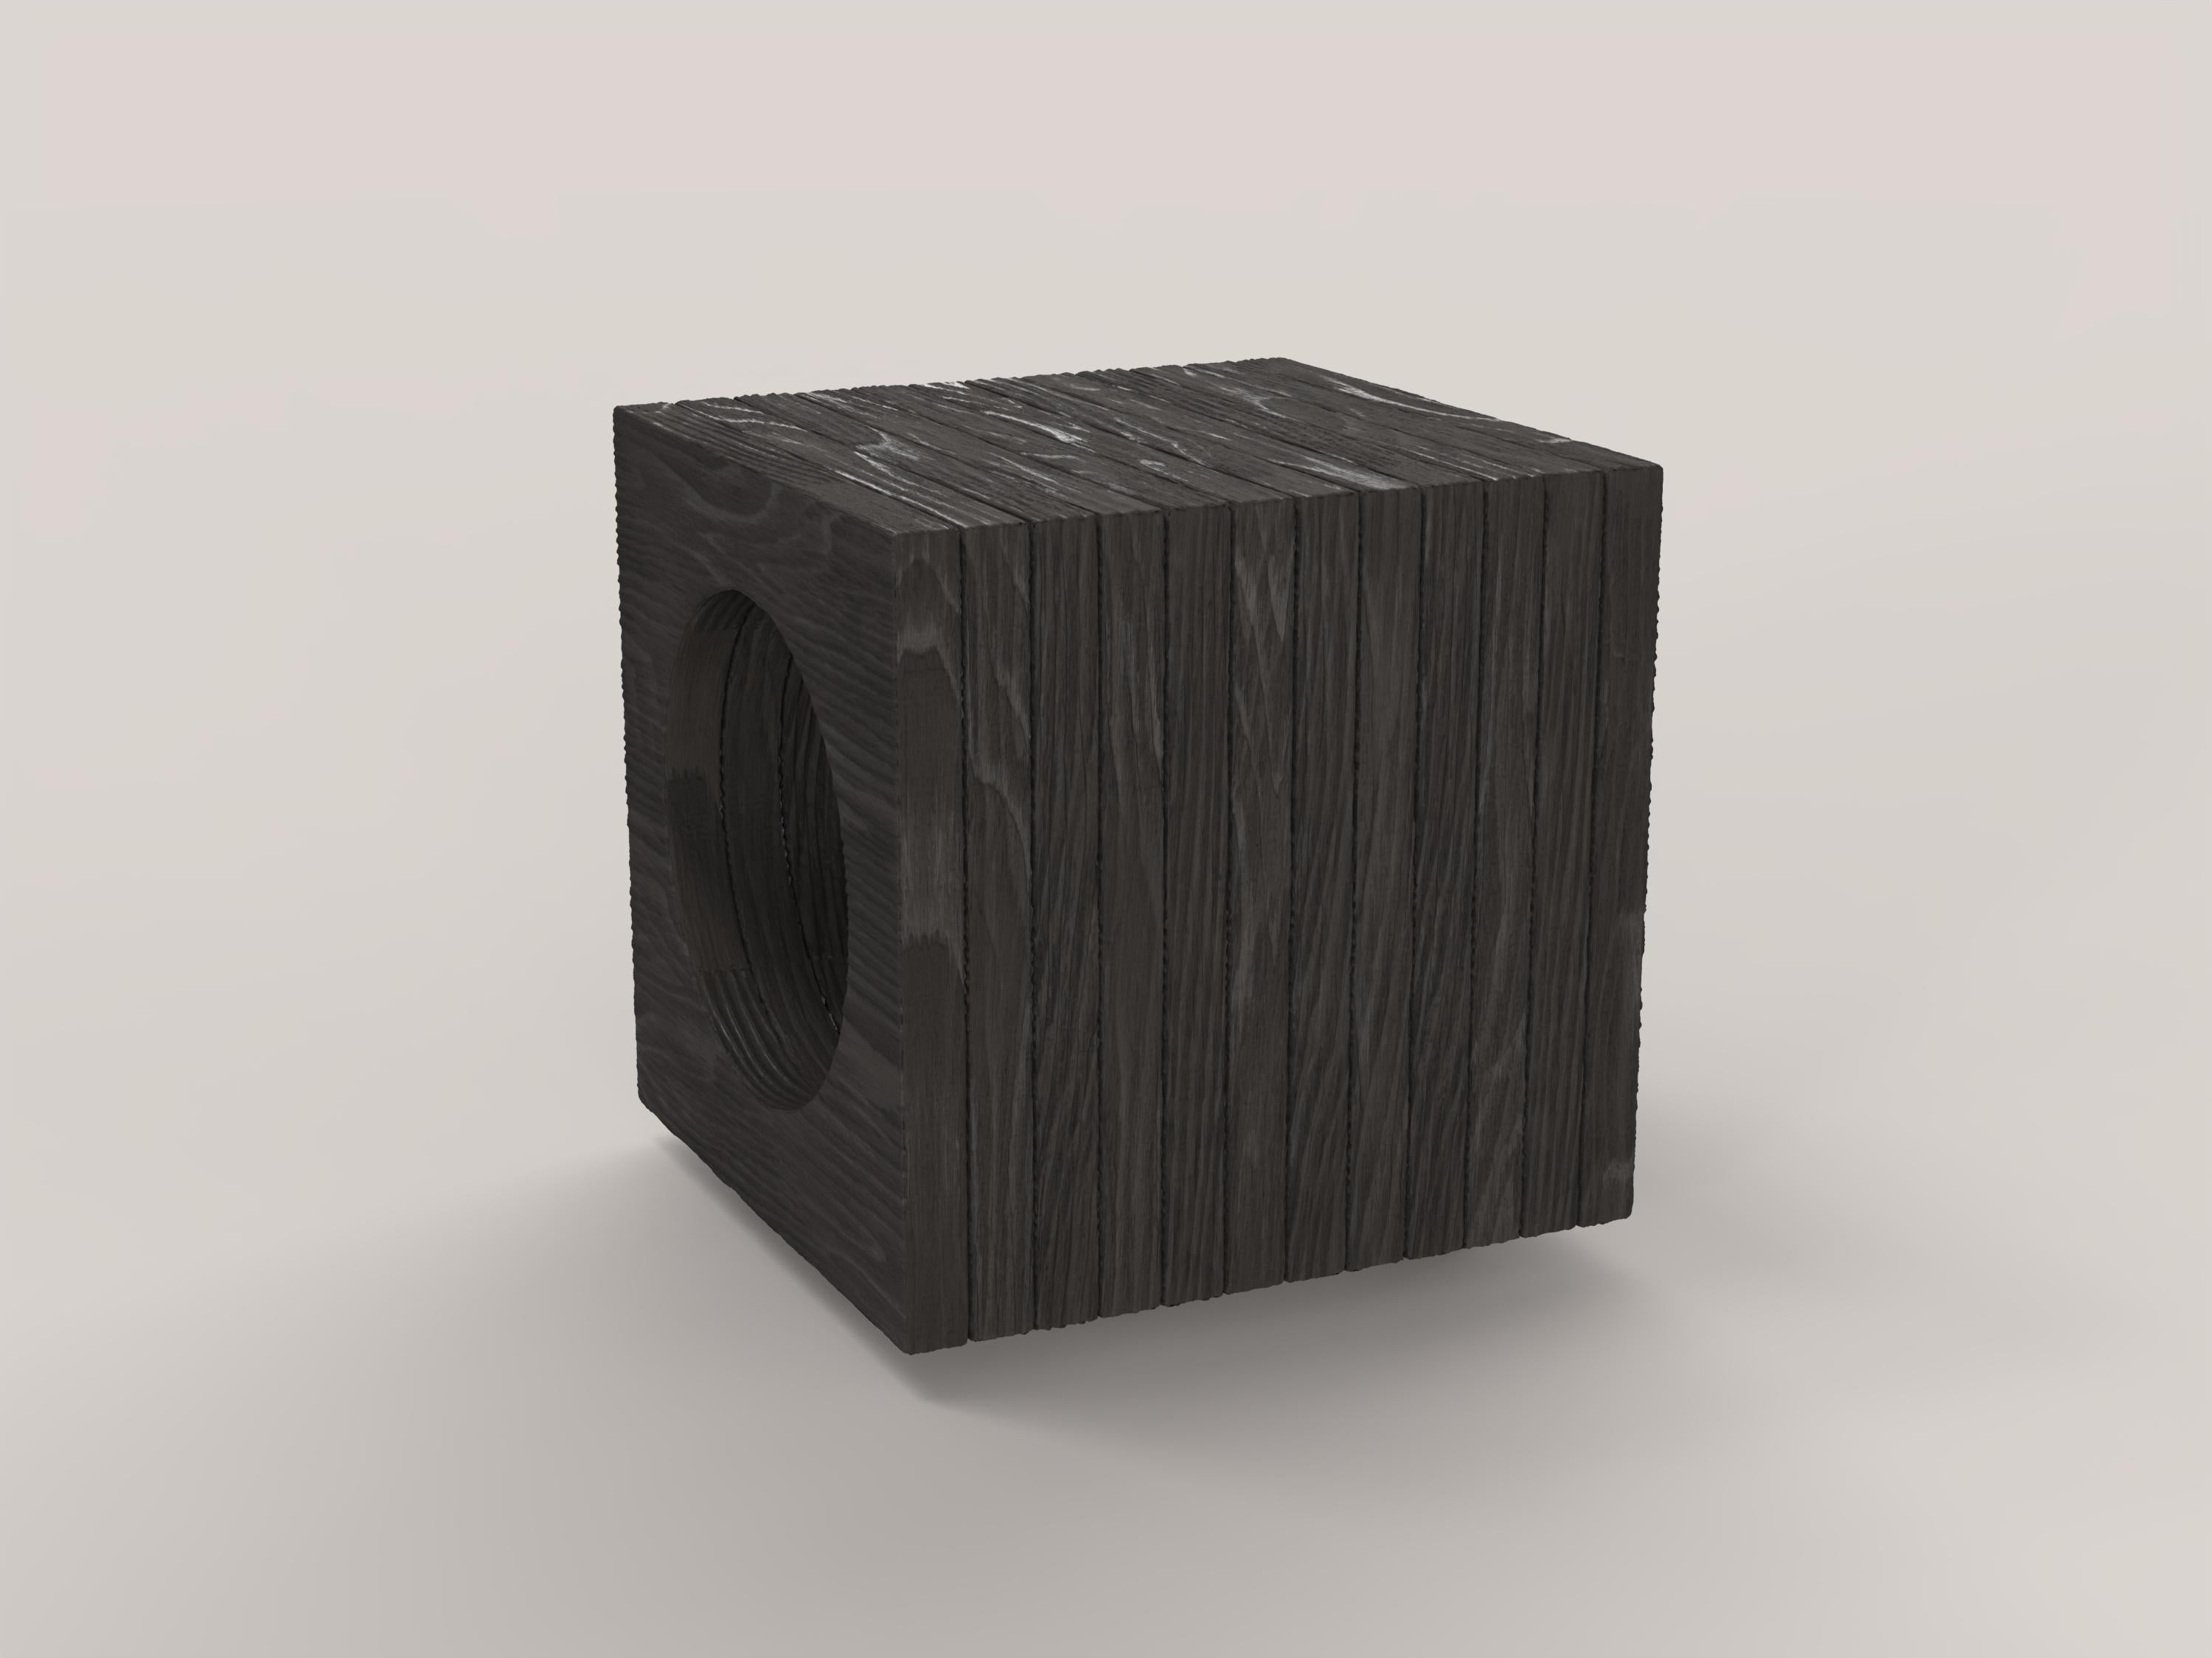 Woodwork Contemporary Limited Edition Signed Charred Stool, Coda V1 by Edizione Limitata For Sale